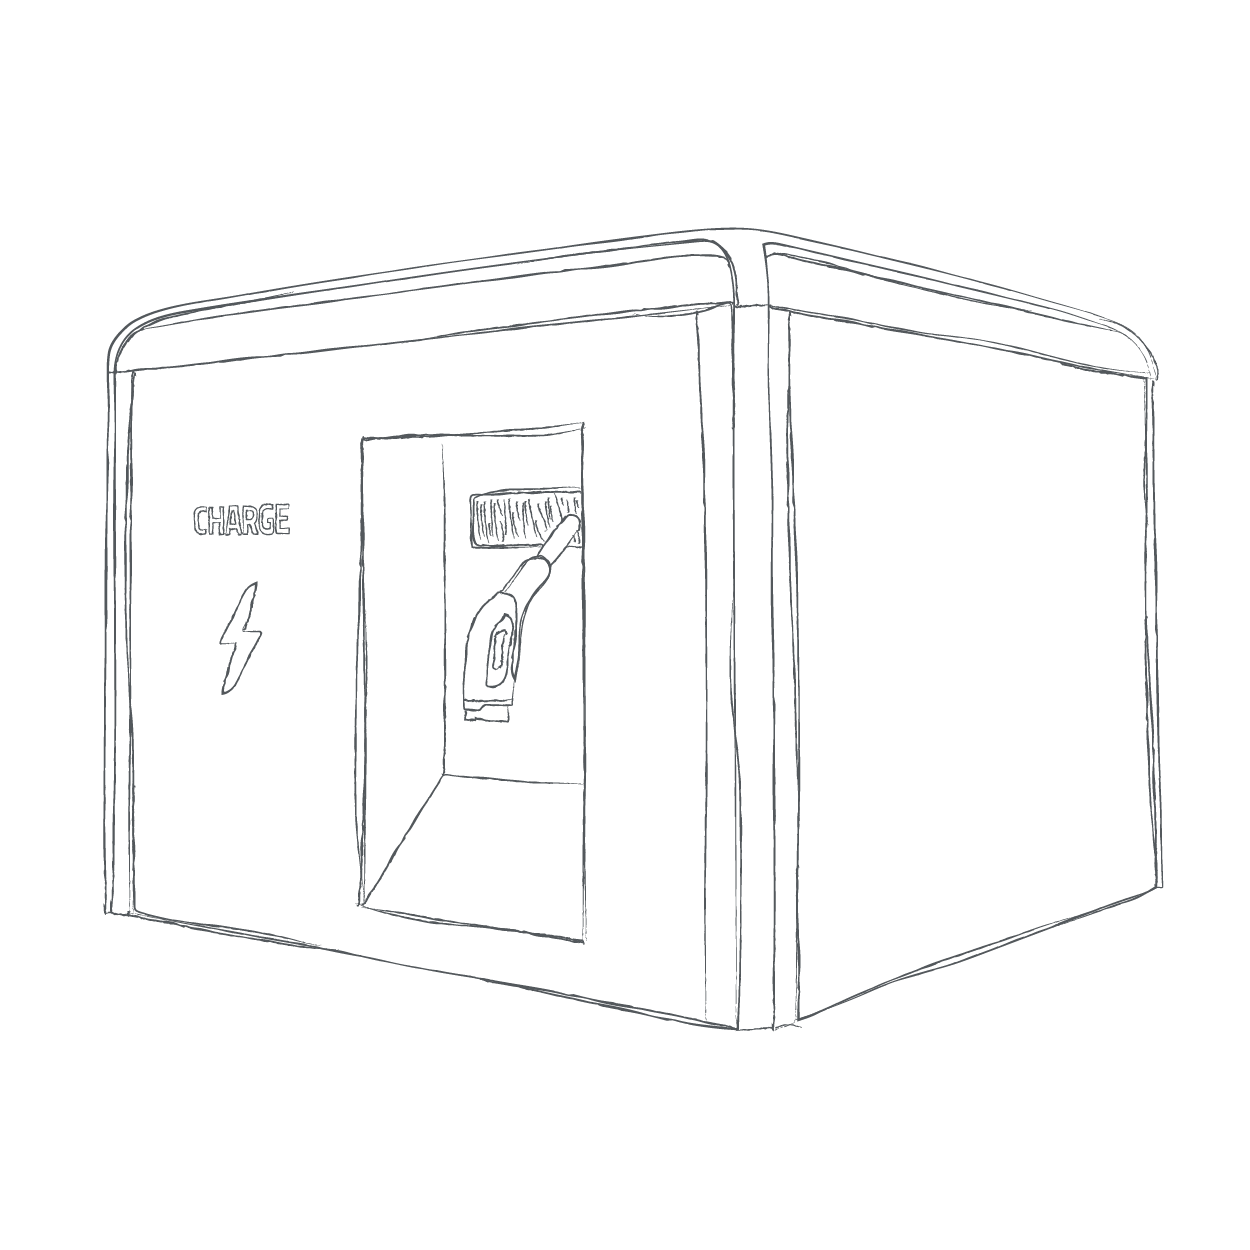 BETA charge cube sketch